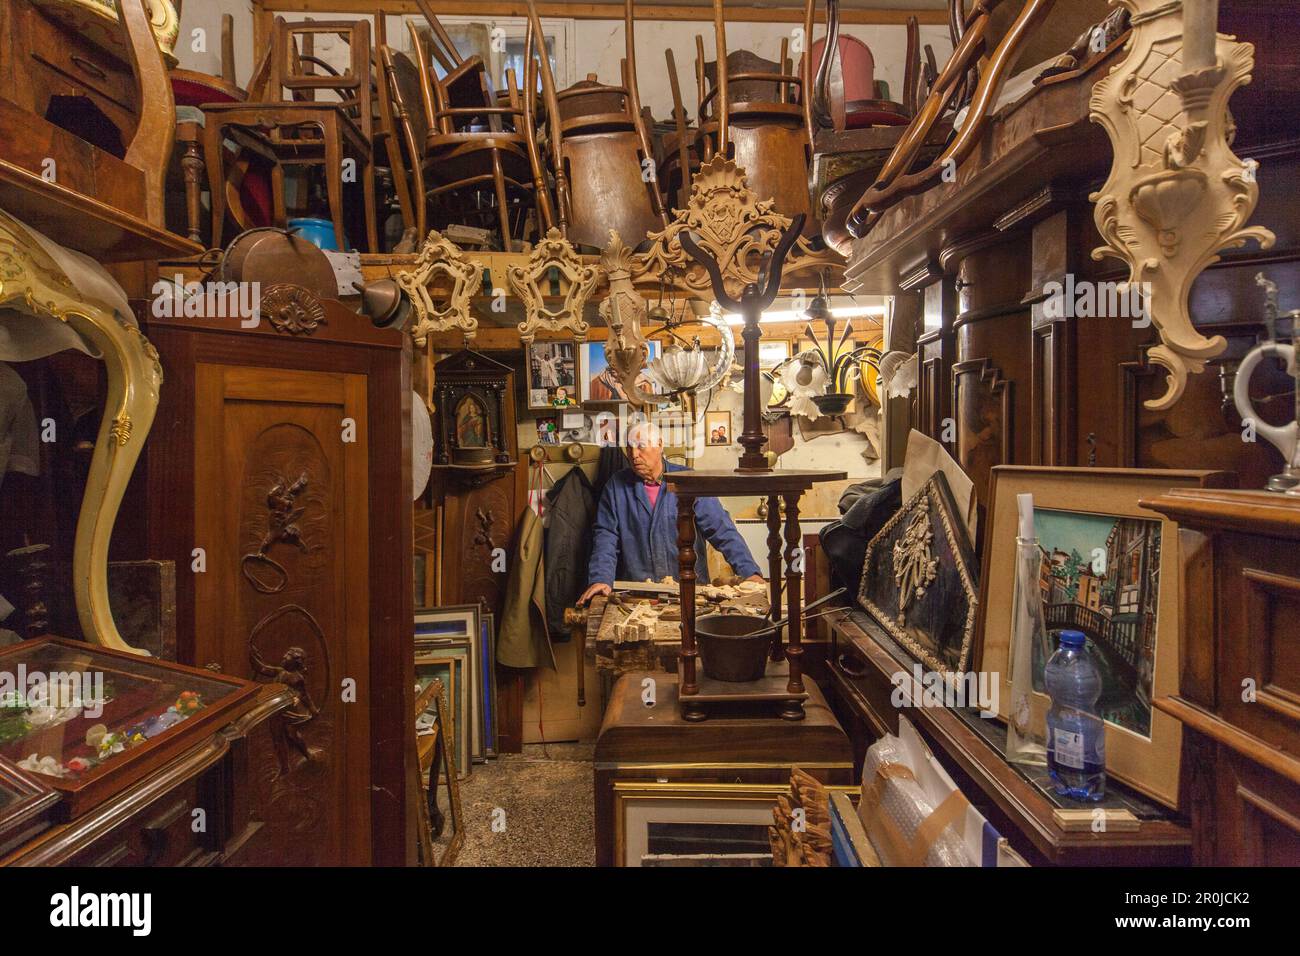 woodcarver, Emilio Piacentini restores furniture, chairs, carves picture frames, timber artefacts, decoration for gondolas, Cannaregio, Venice, Italy Stock Photo